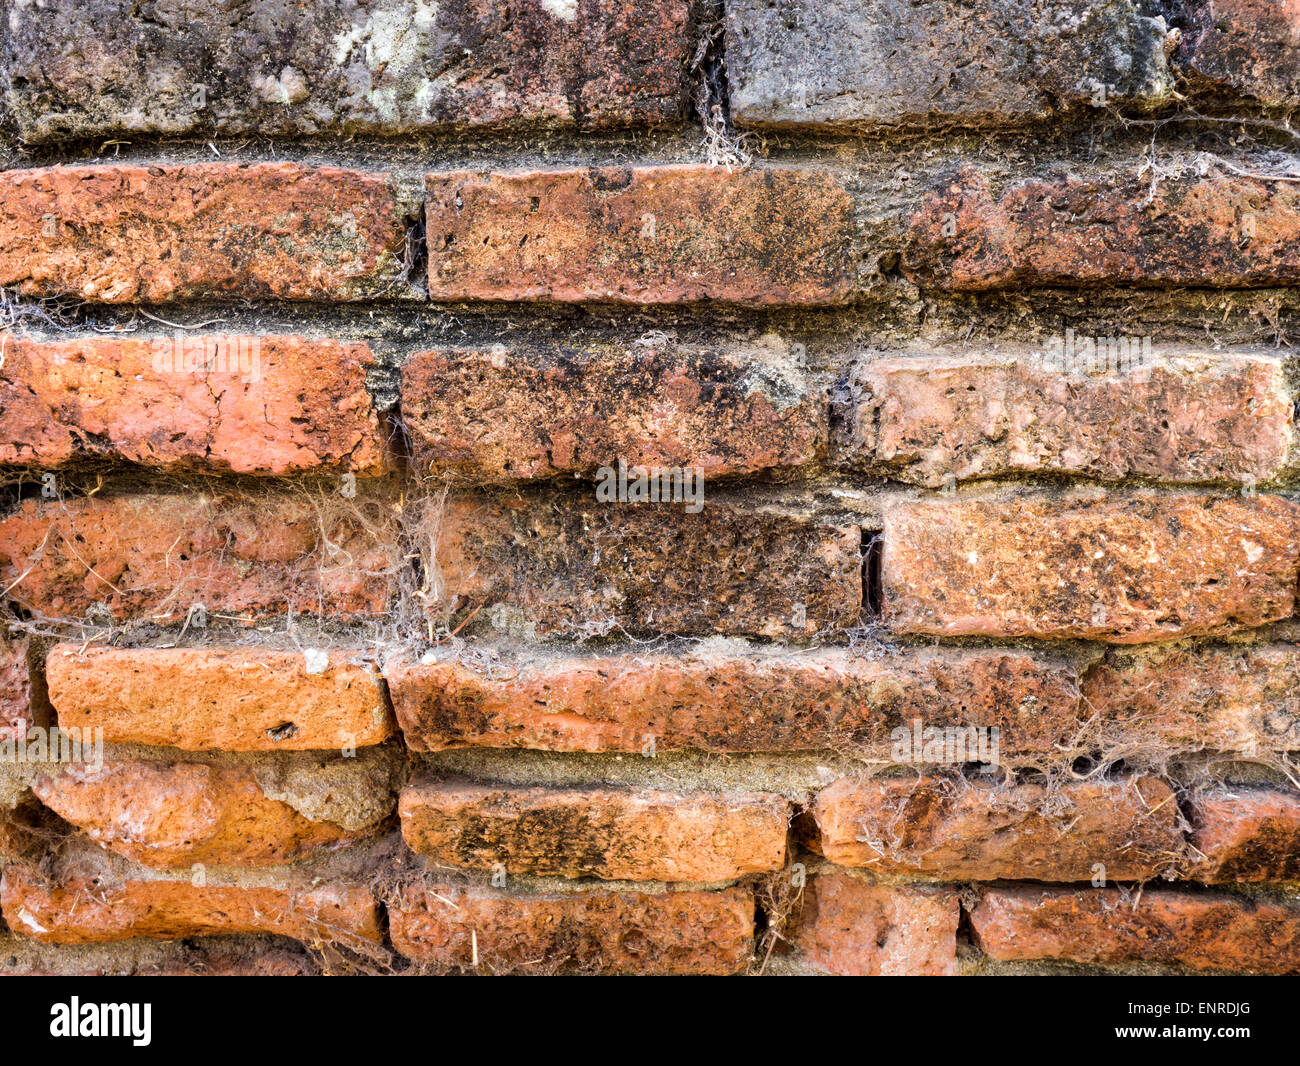 Old Ruin Building with Crumble Brick Wall Texture Stock Photo